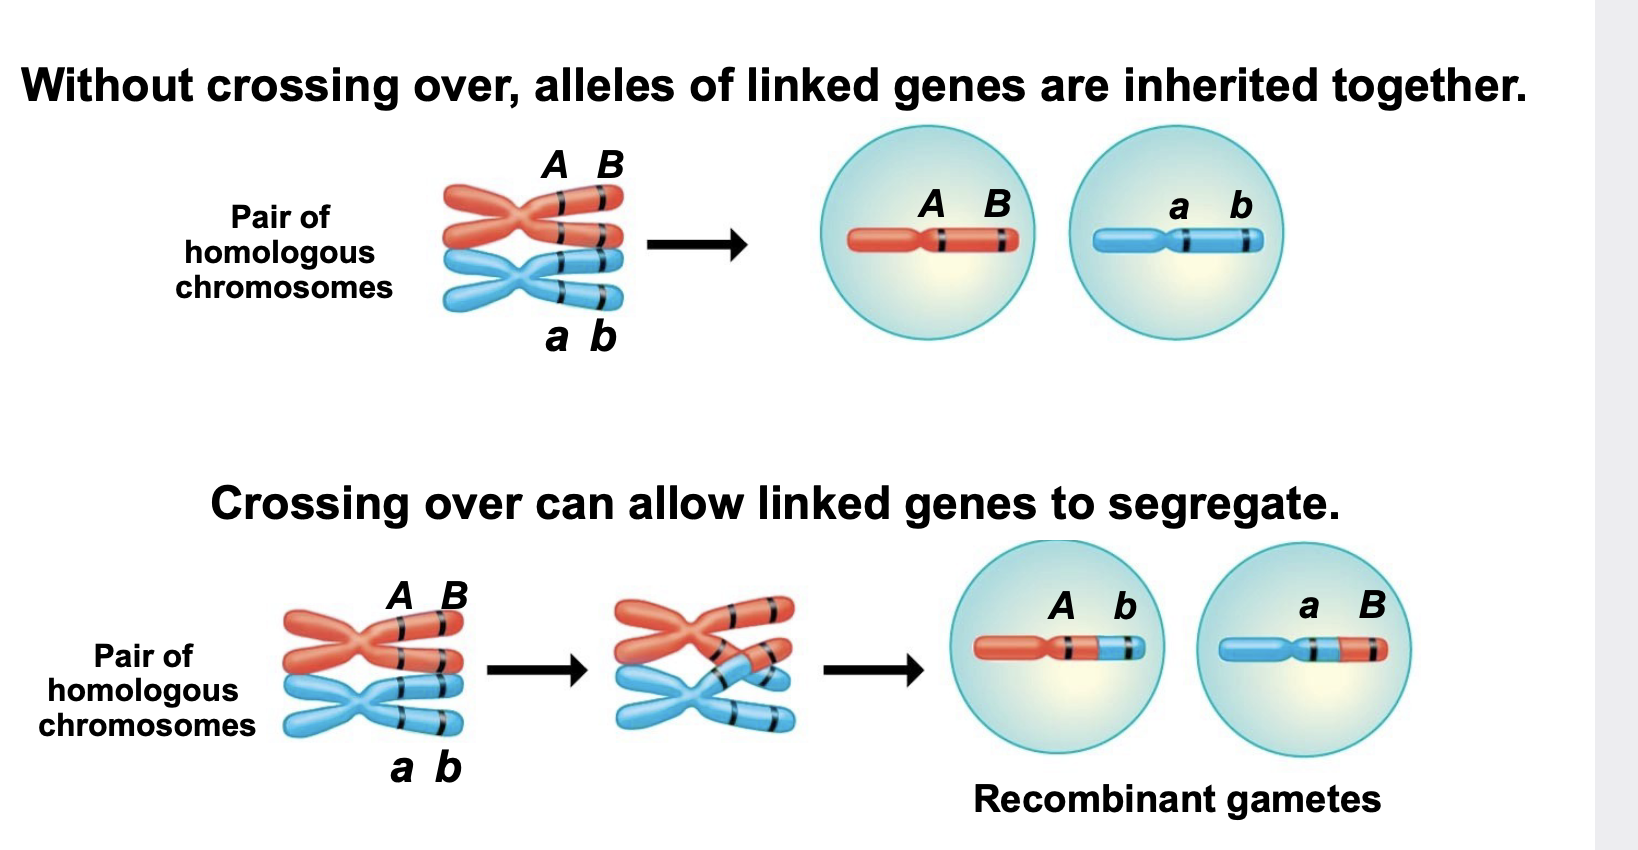 <p>.located on the same chromosome and therefore tend to be inherited together and are thus exceptions to Mendel’s law of independent assortment</p><p>.Crossing over can allow occasional segregation of linked genes</p><p>.For example, the A and B genes are linked (located on the same chromosome). Therefore the alleles of the genes on the same chromosome will stay together (will not segregate) during gamete formation unless crossing over occurs to produce recombinants. Without crossing over, alleles of linked genes are inherited together. Crossing over can allow linked genes to segregate.</p>